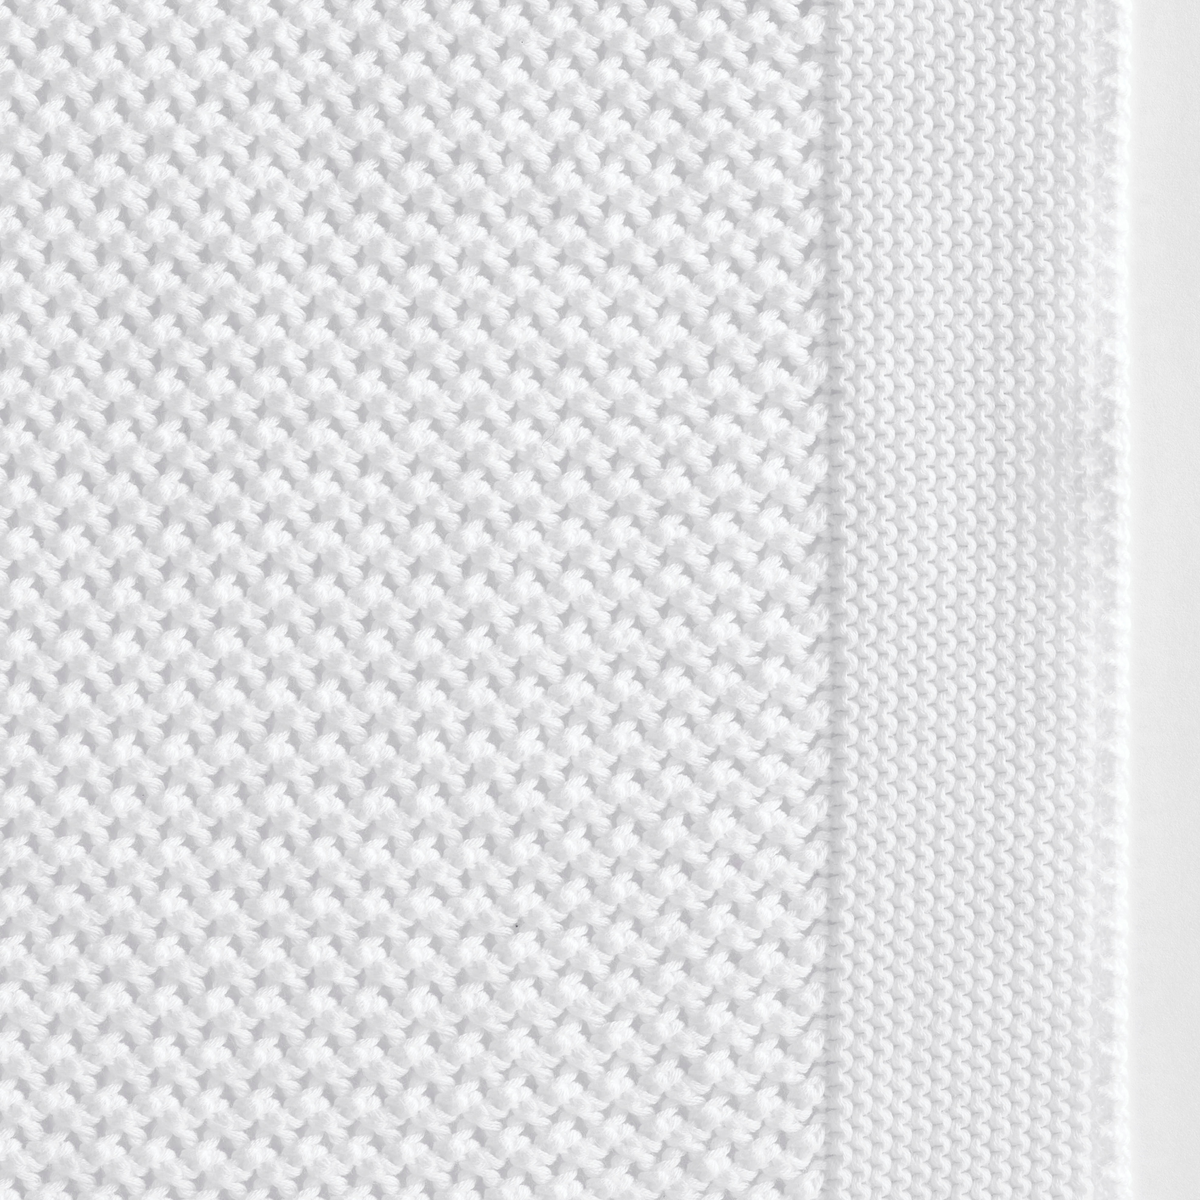 Swatch Sample of Celso de Lemos Balade Throw in White Color